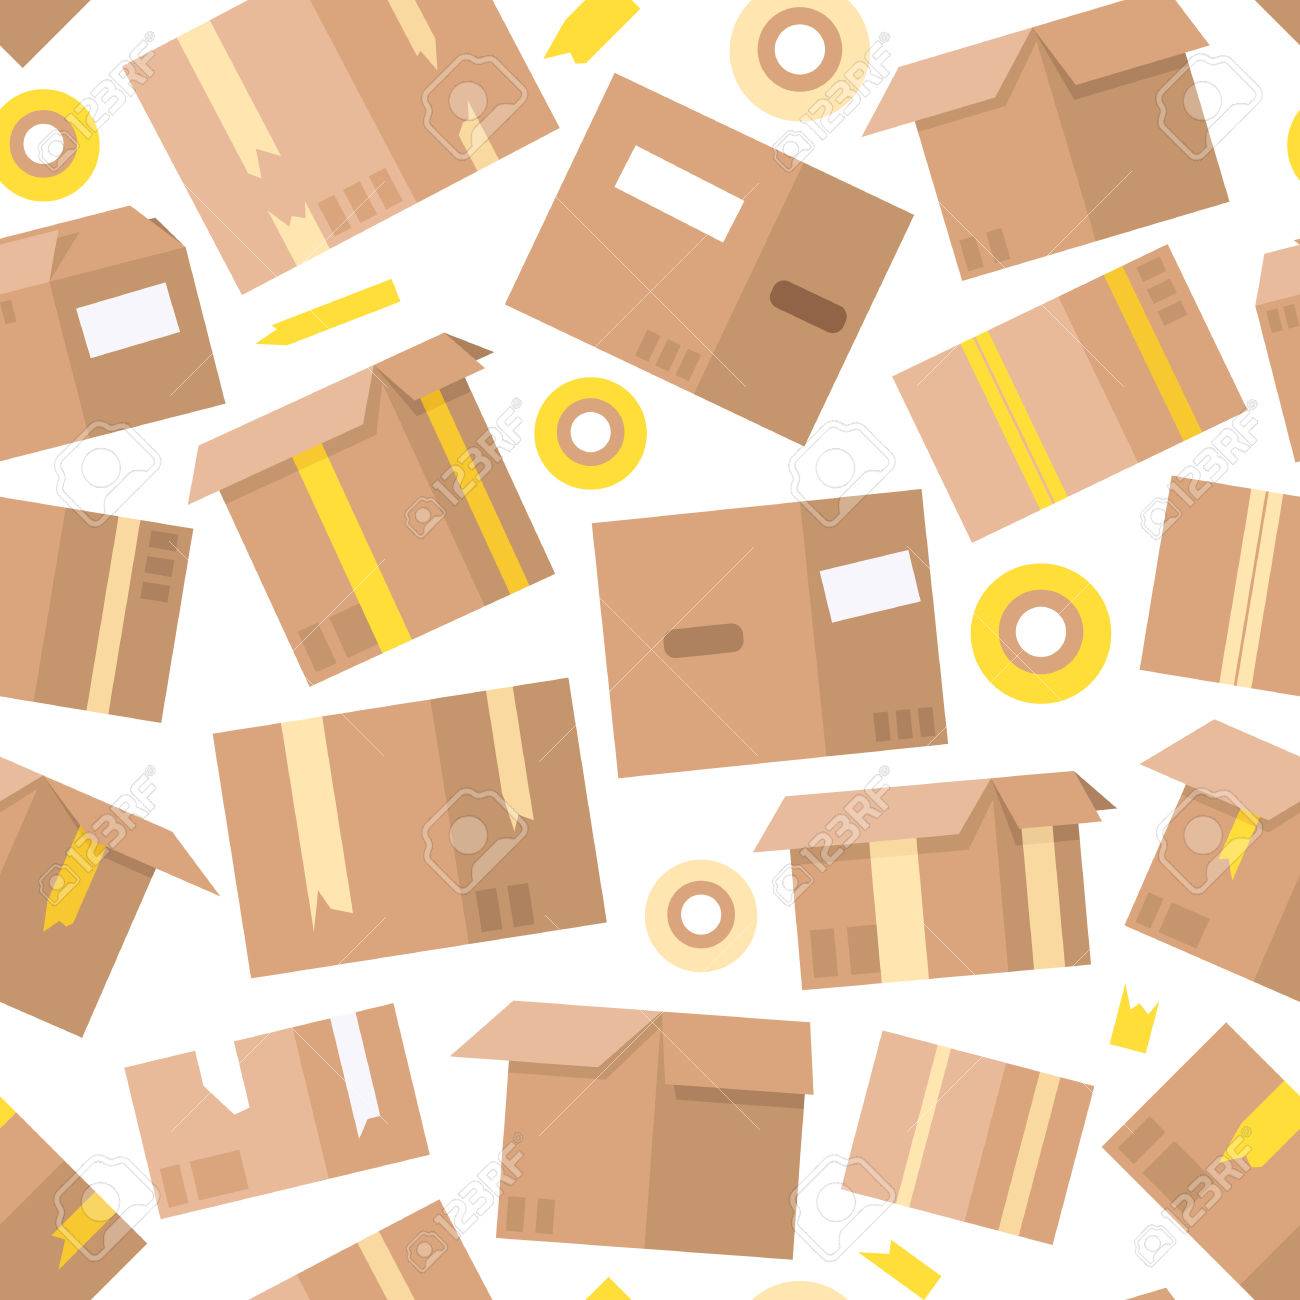 Carrying Boxes Seamless Pattern Warehouse Shipping Container